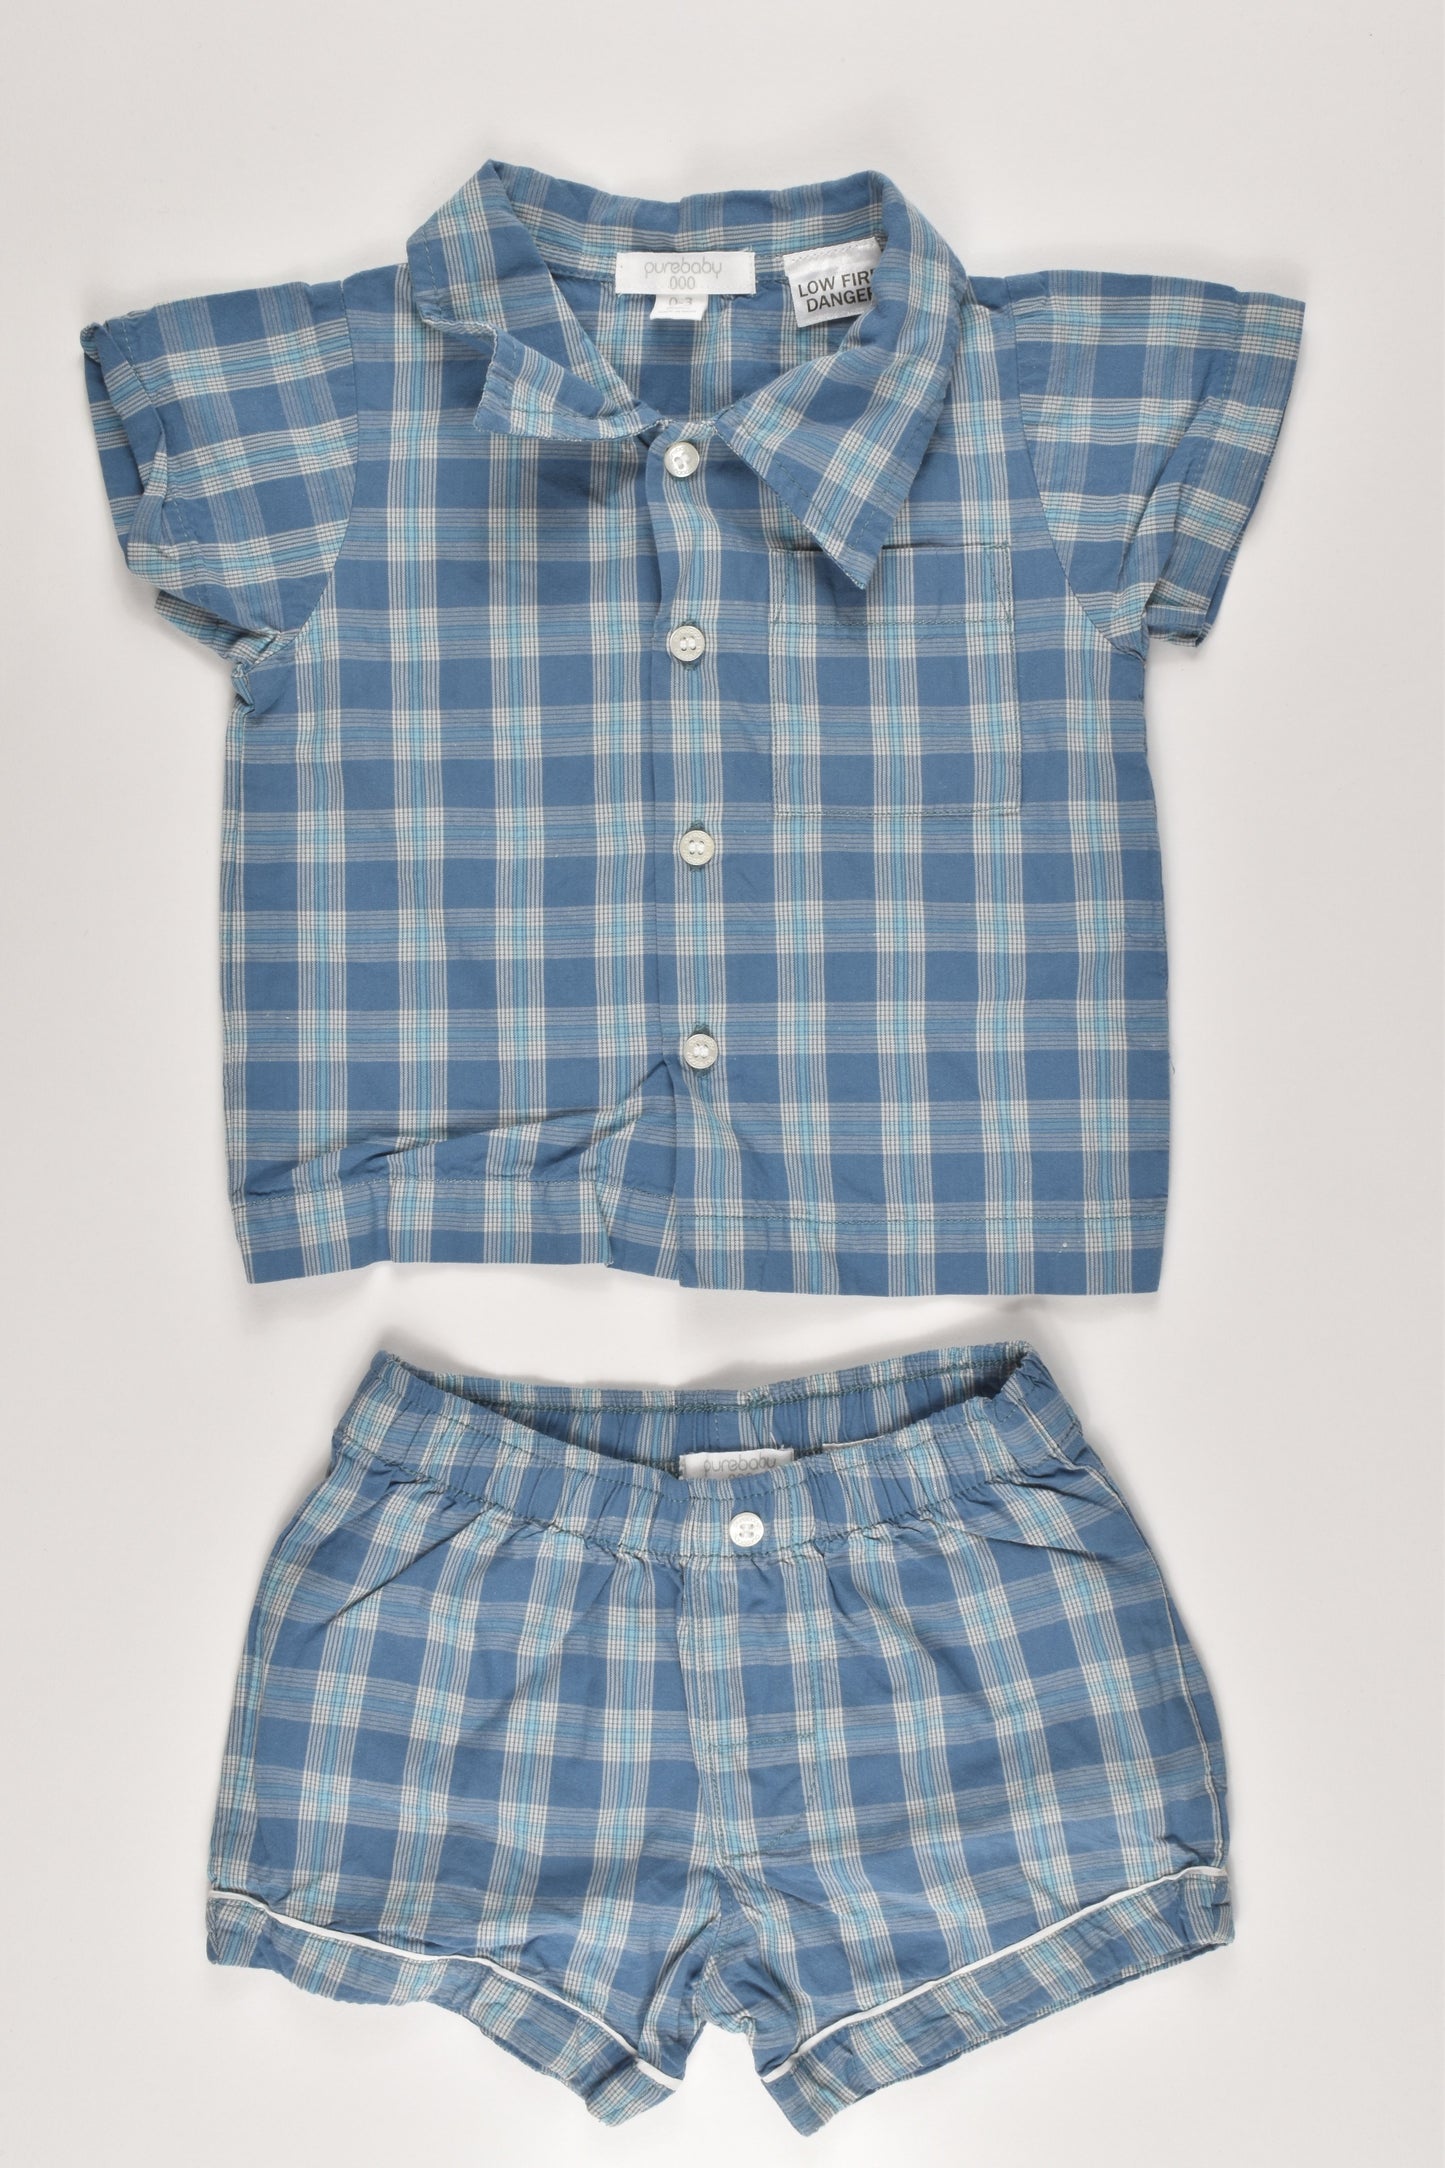 Purebaby Size 000 (0-3 months) Shirt and Shorts